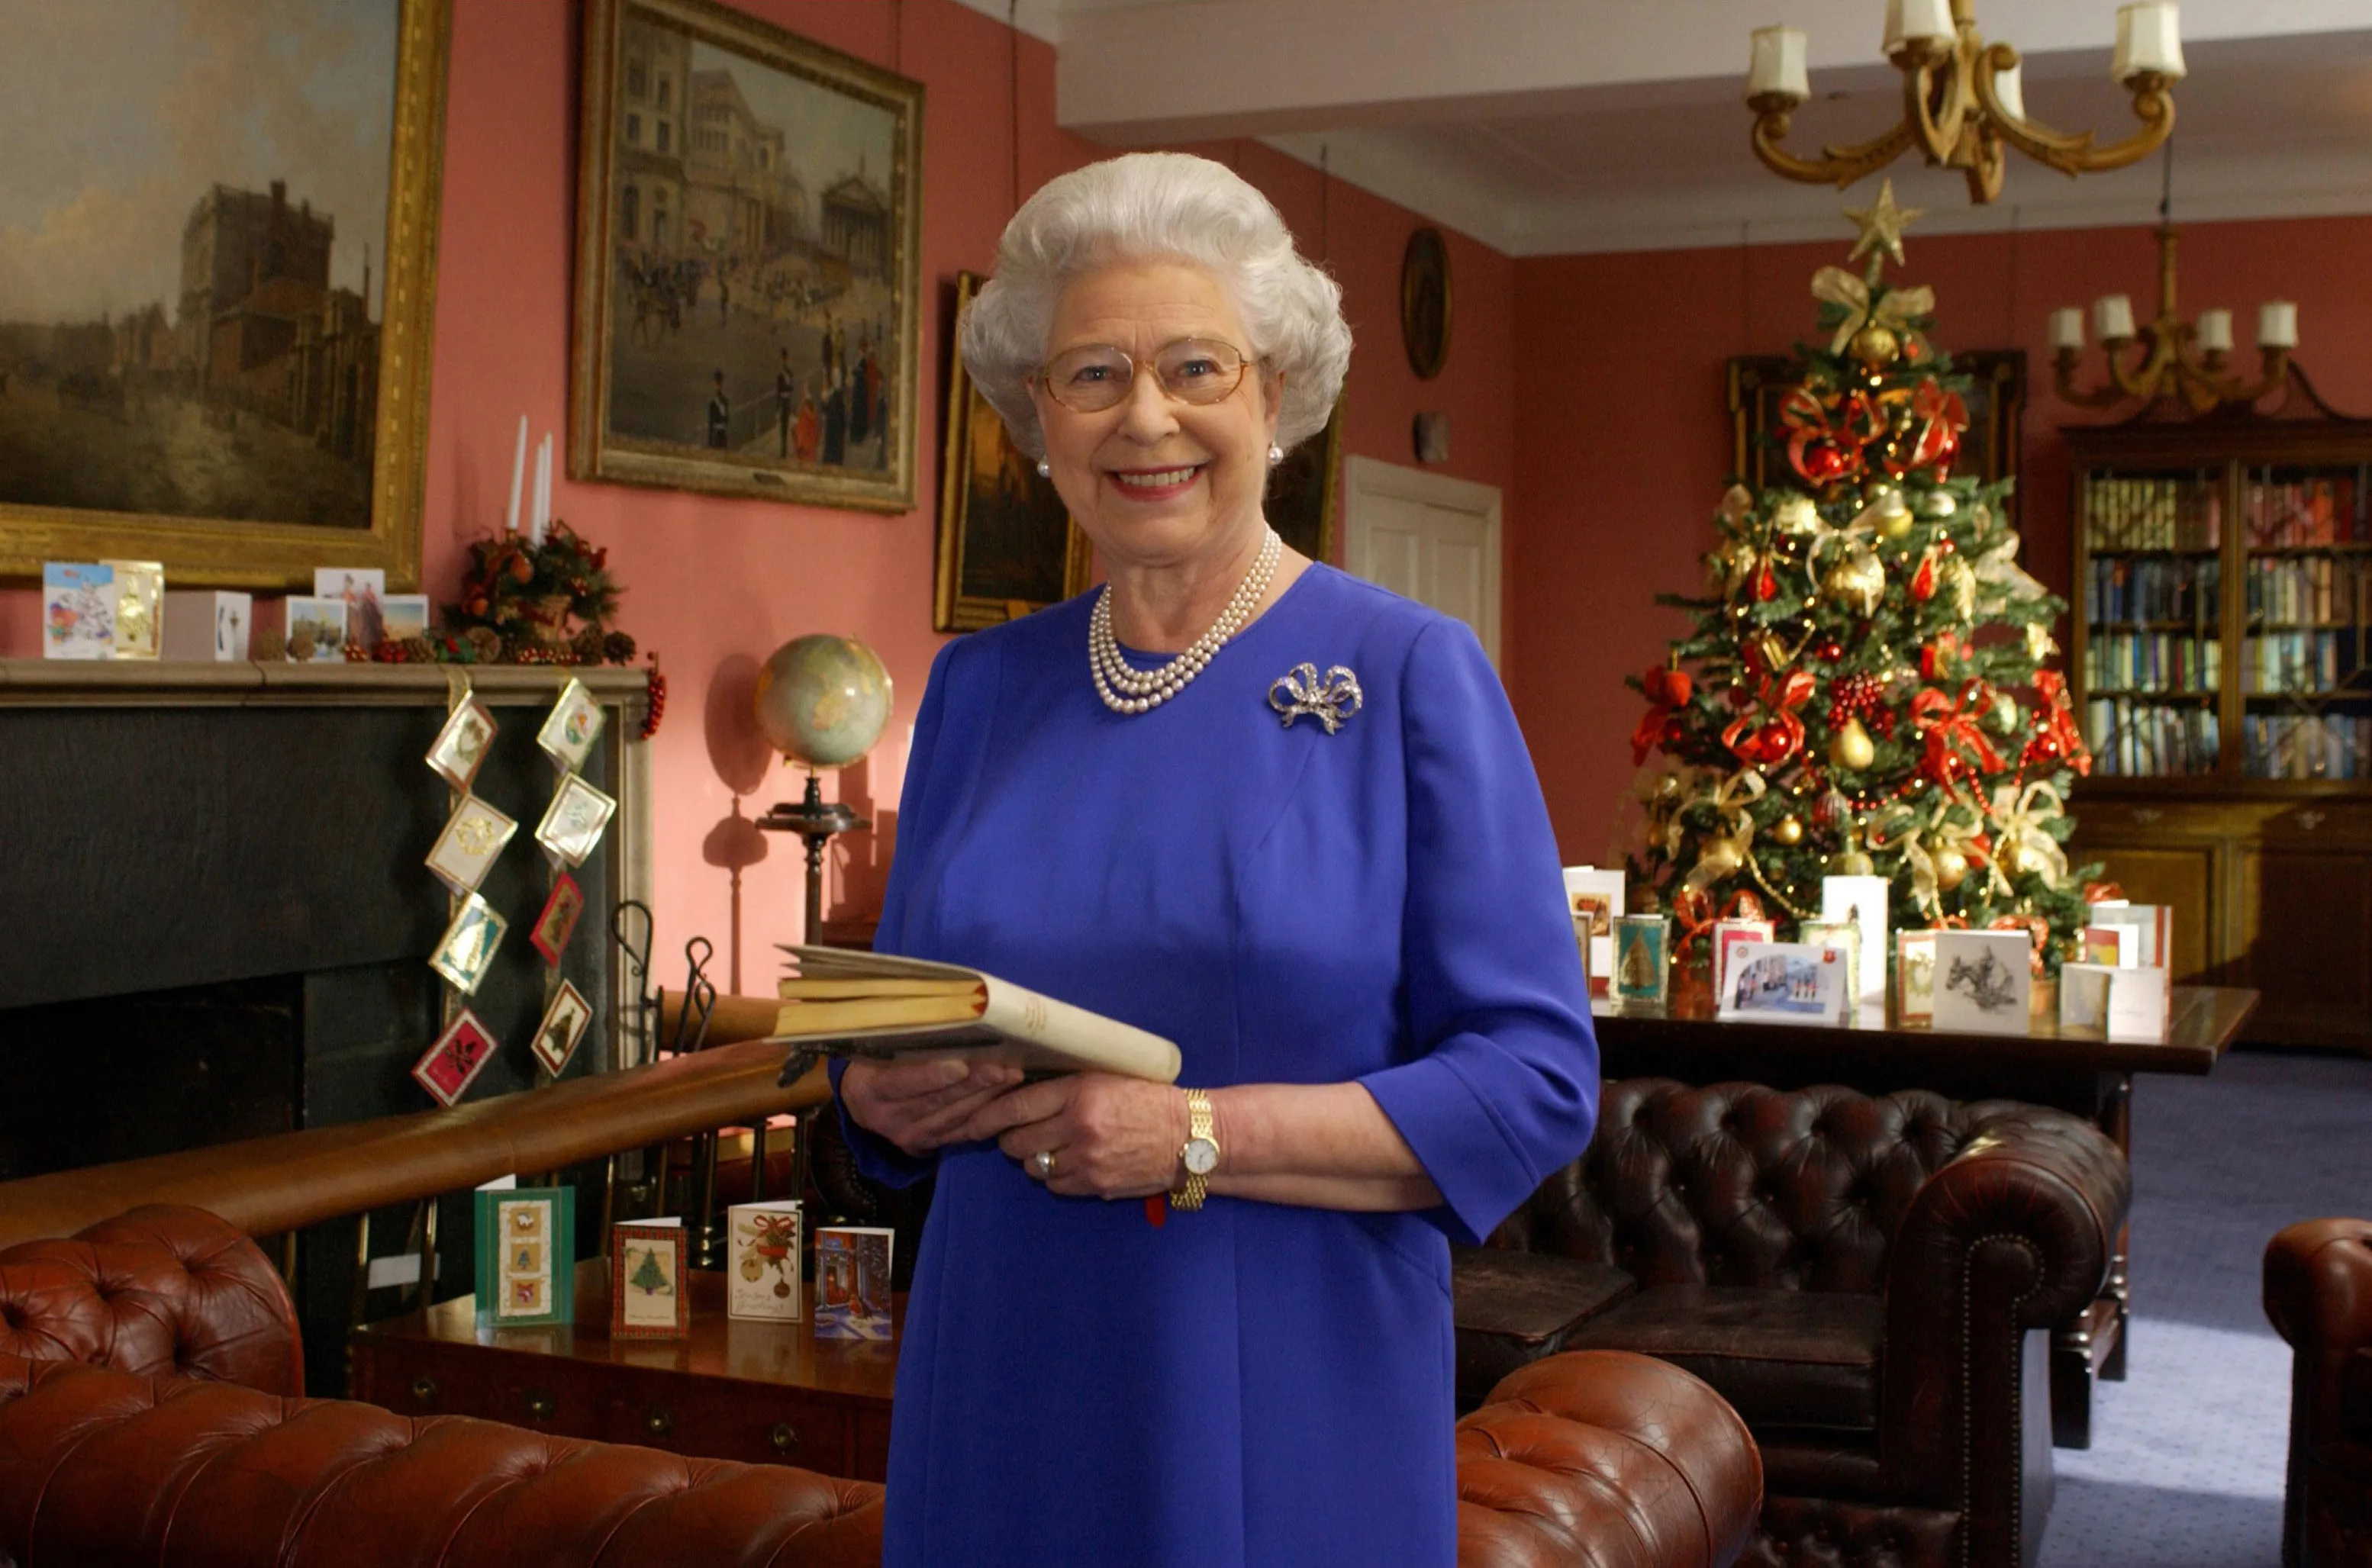 Queen Elizabeth II films her traditional Christmas broadcast to the Commonwealth from Buckingham Palace on Dec. 19, 2001 in London, England.?w=200&h=150